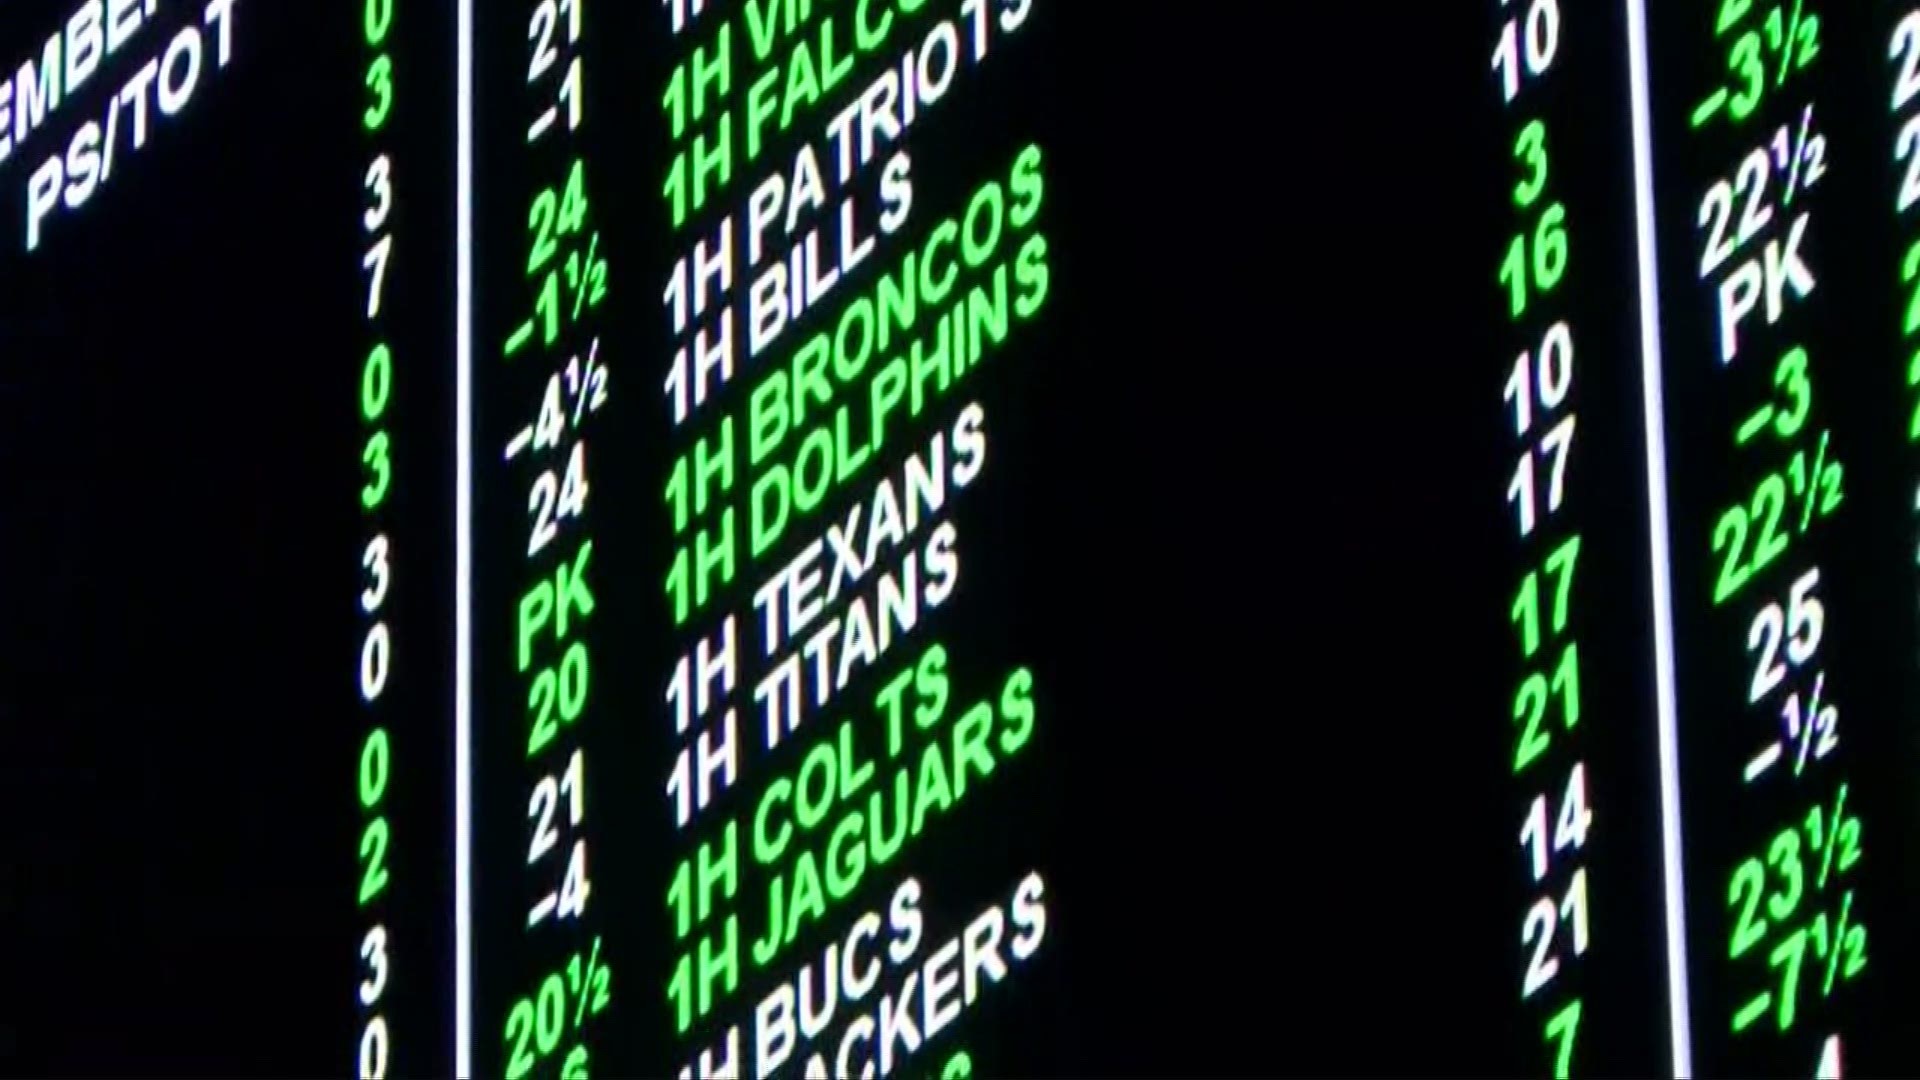 With the national ban struck down, when will sports gambling be legal in Ohio?